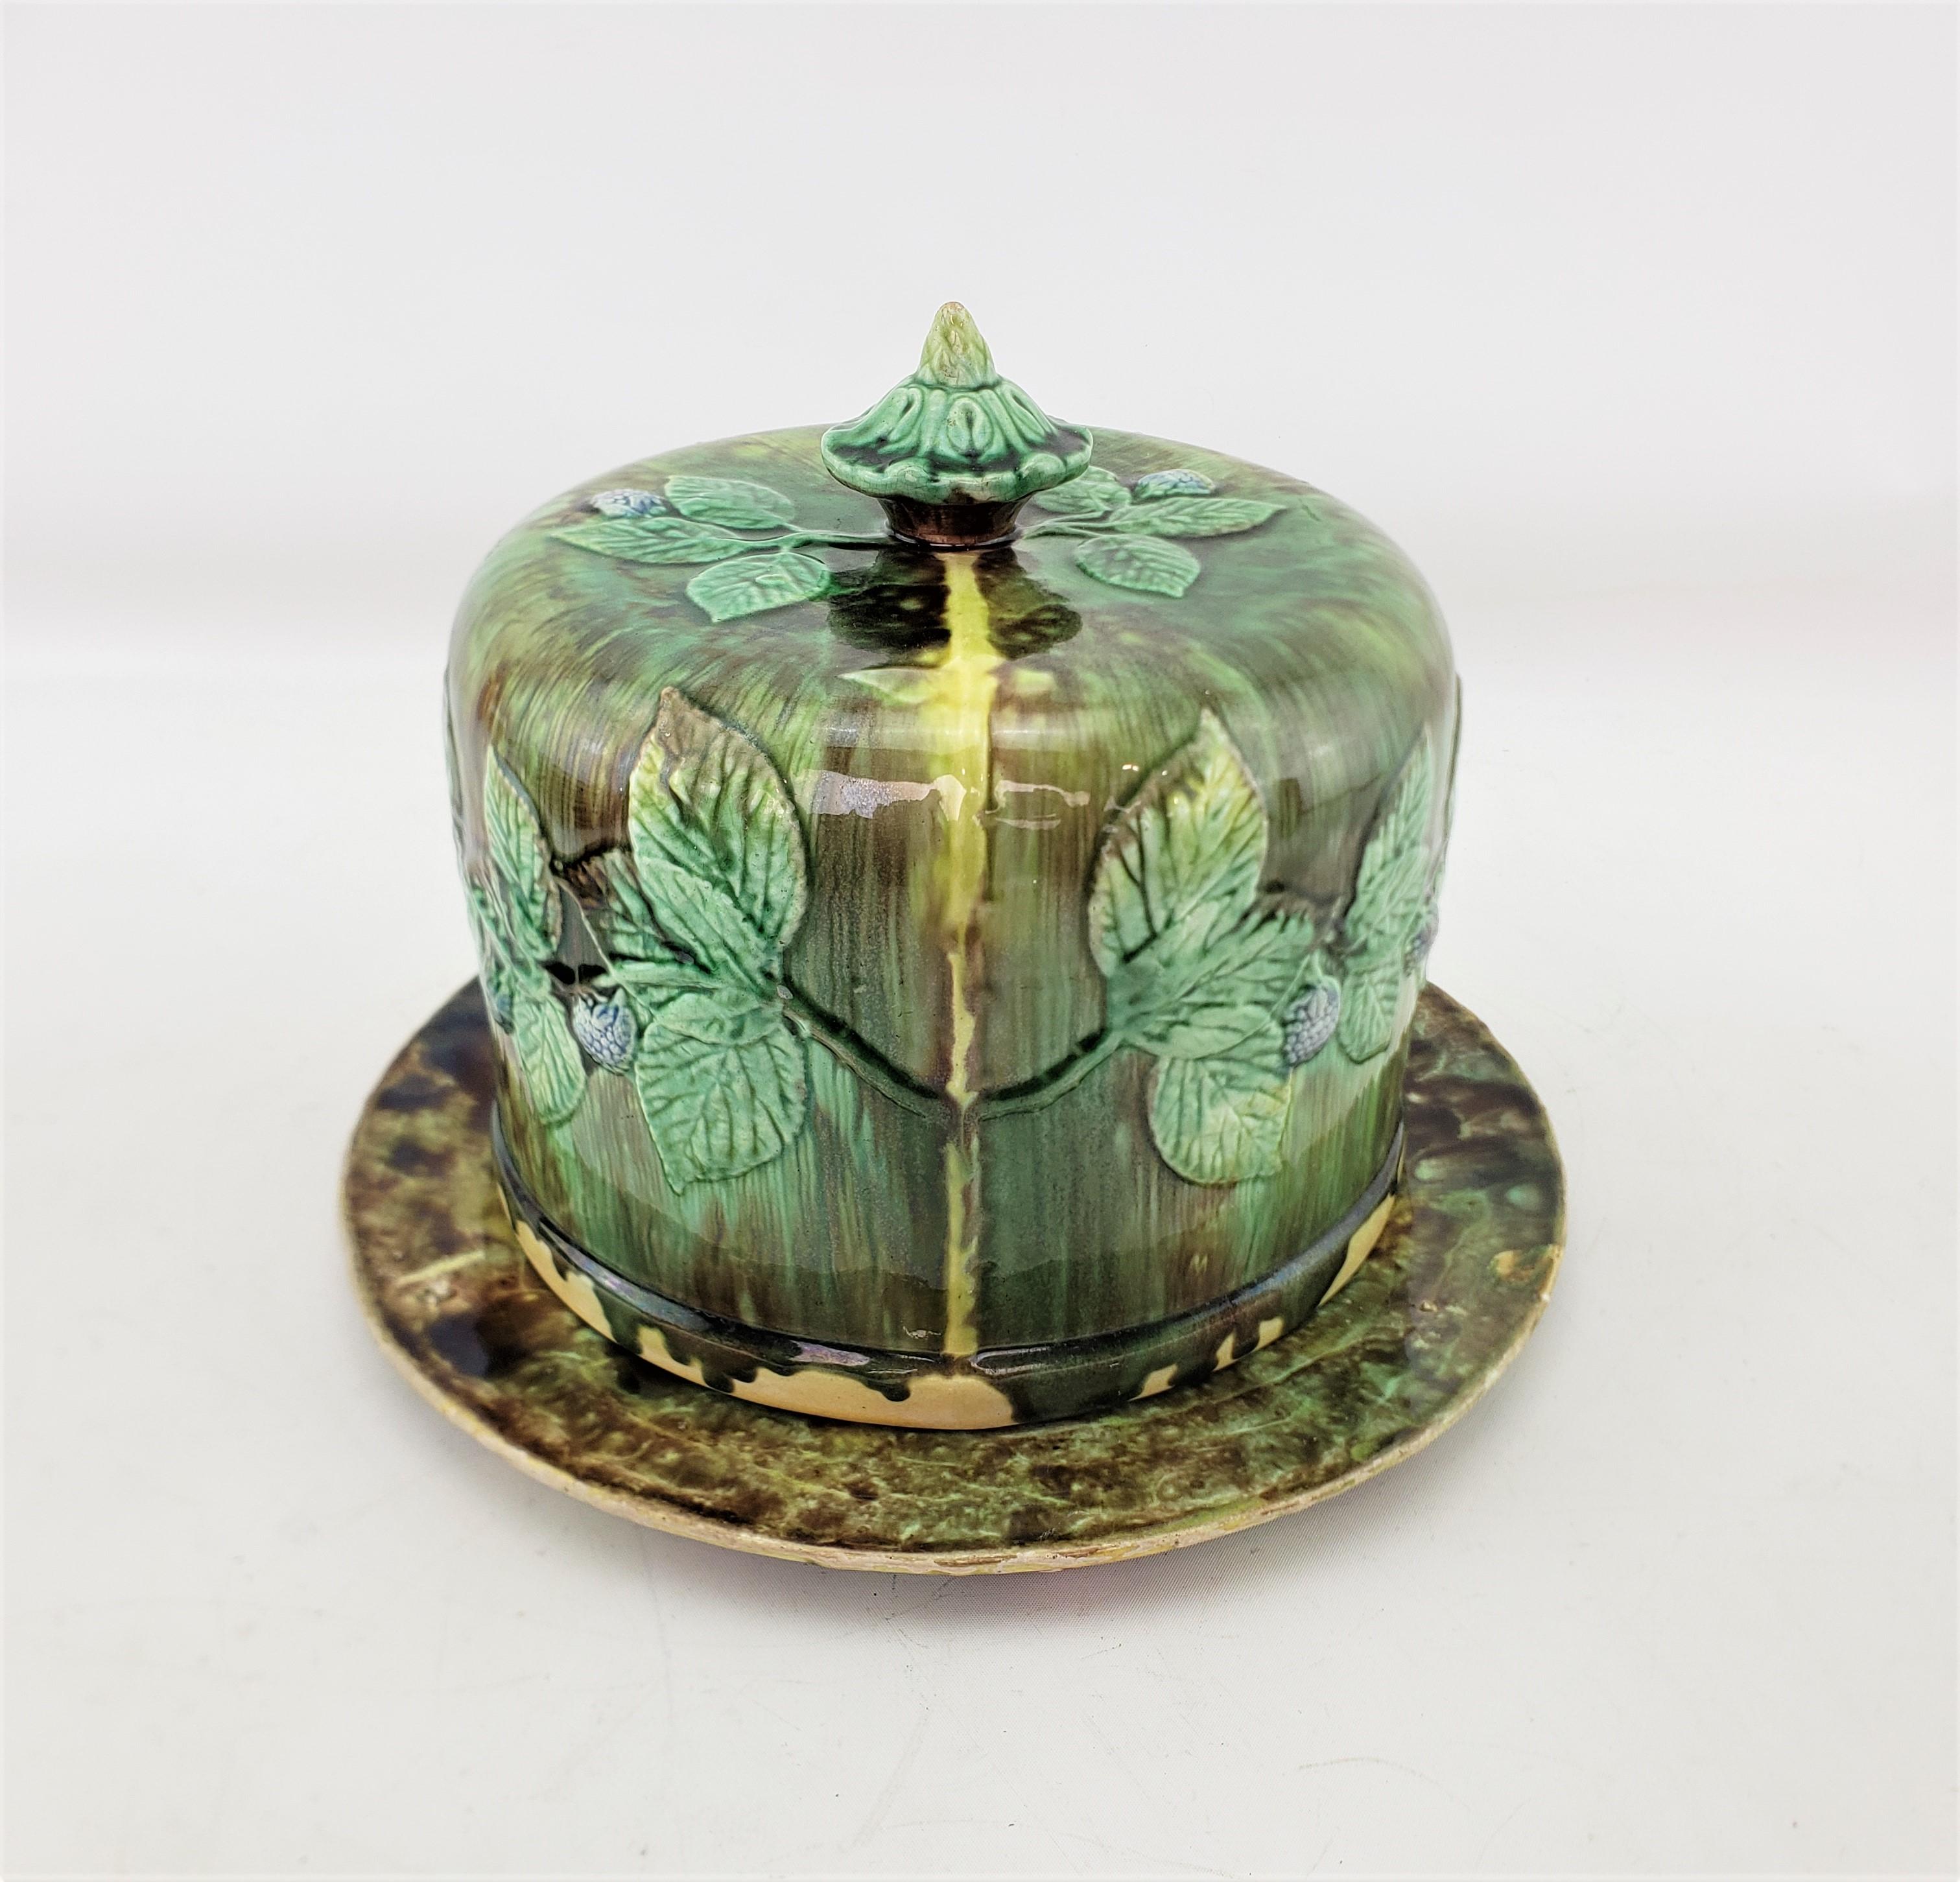 Large Antique Majolica Covered Cheese Server or Dome with Leaf & Berry Decor For Sale 2